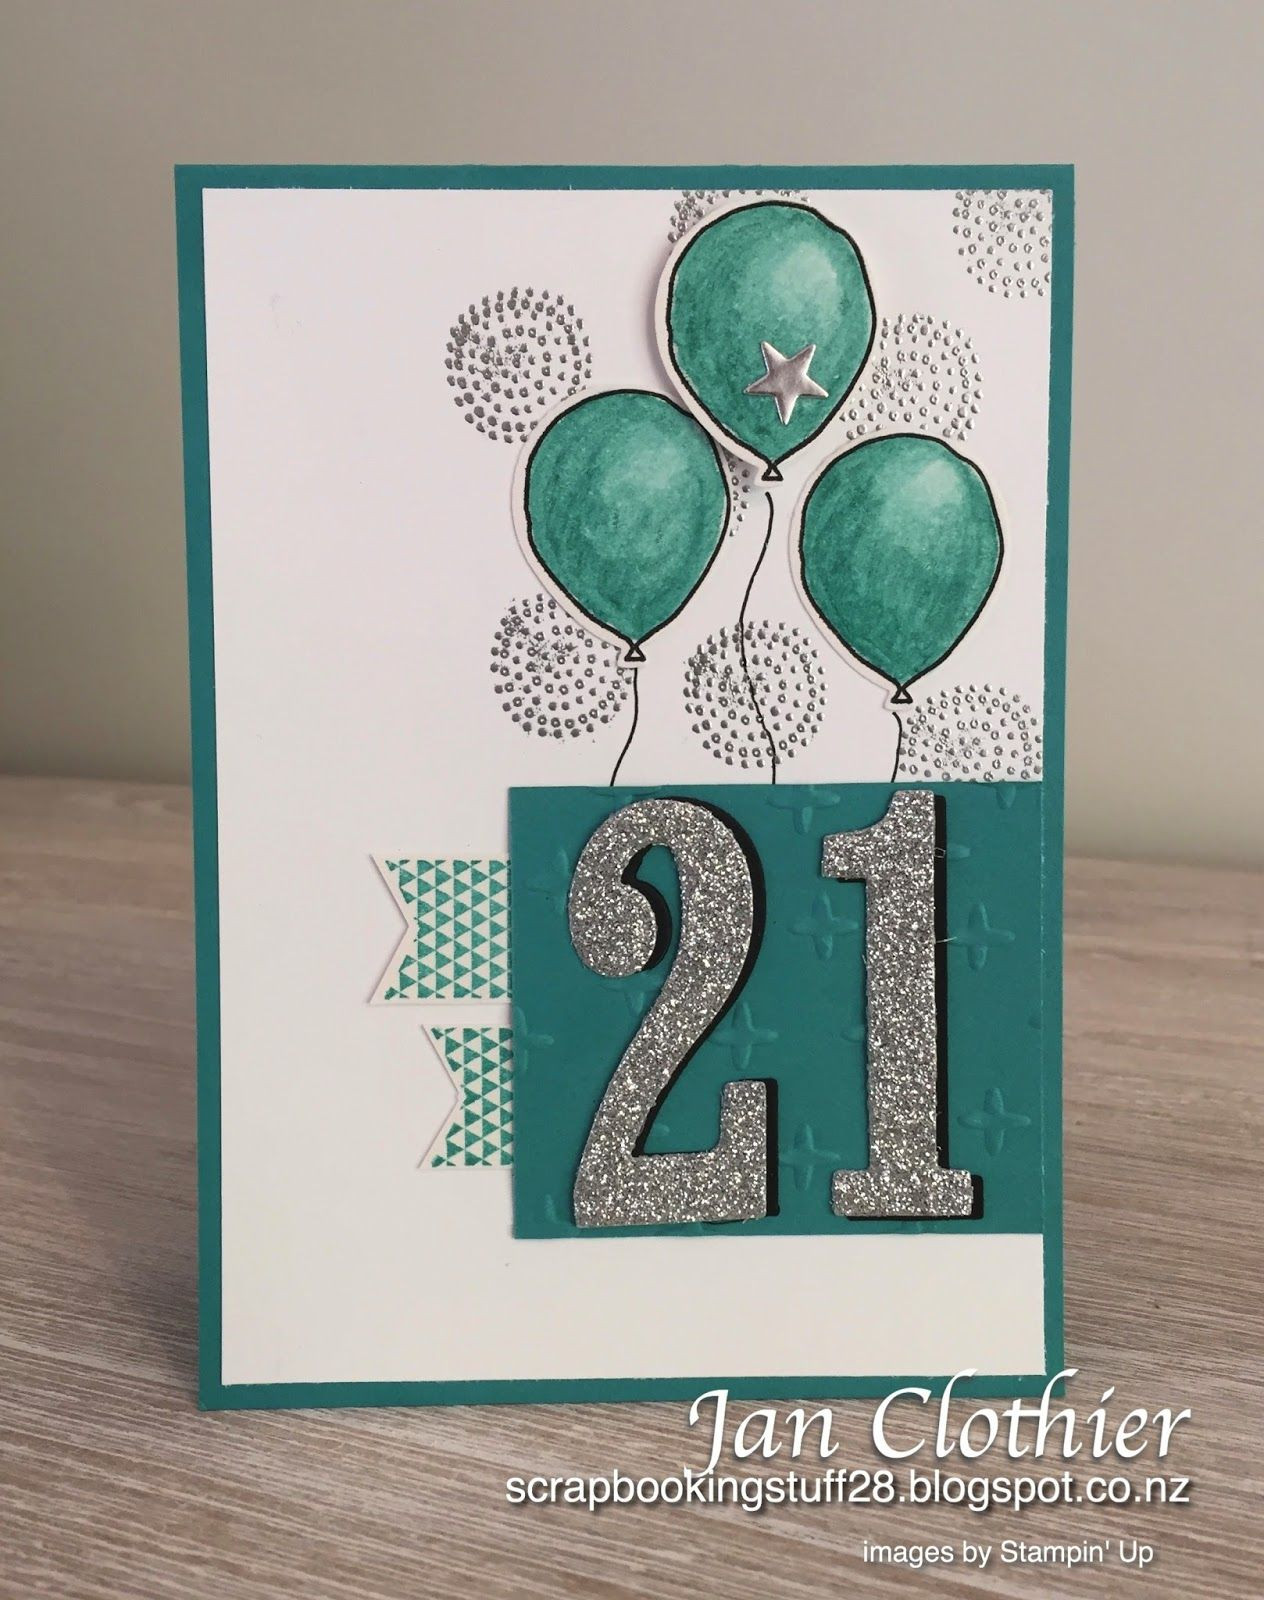 21st Birthday Card Ideas
 I needed a 21st birthday card and nothing in my stash